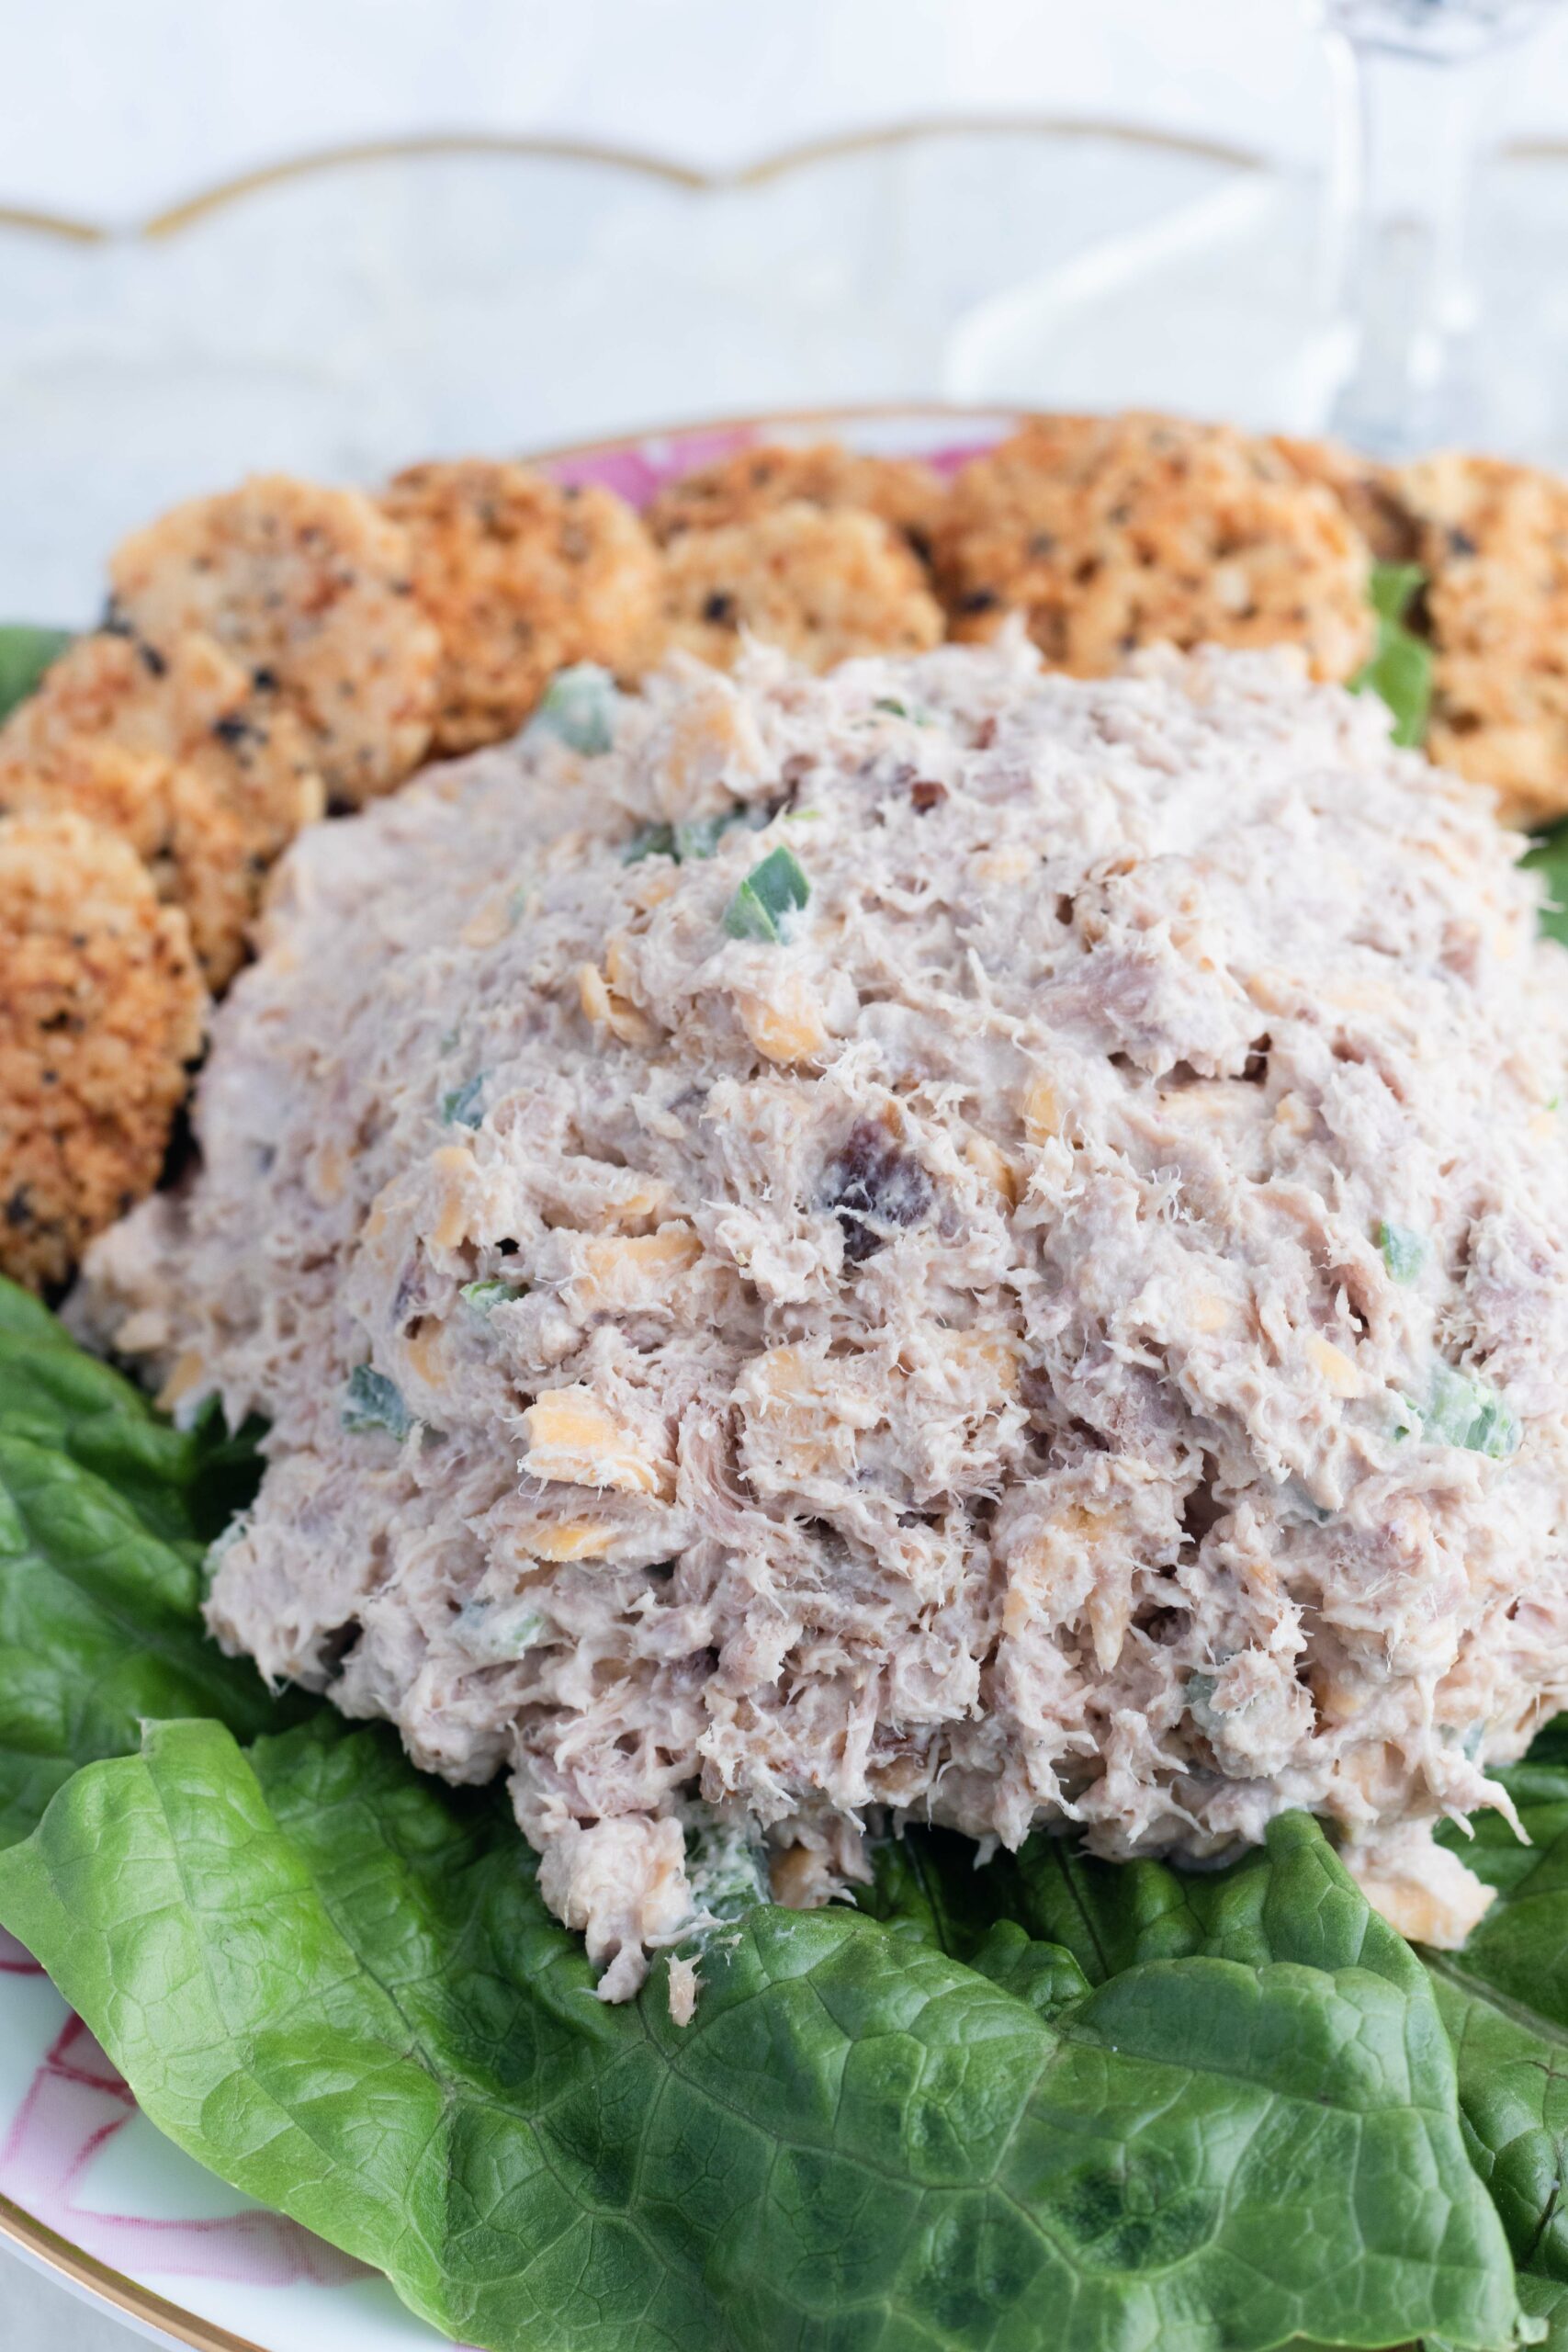 Jalapeno popper tuna fish salad on a bed of lettuce.